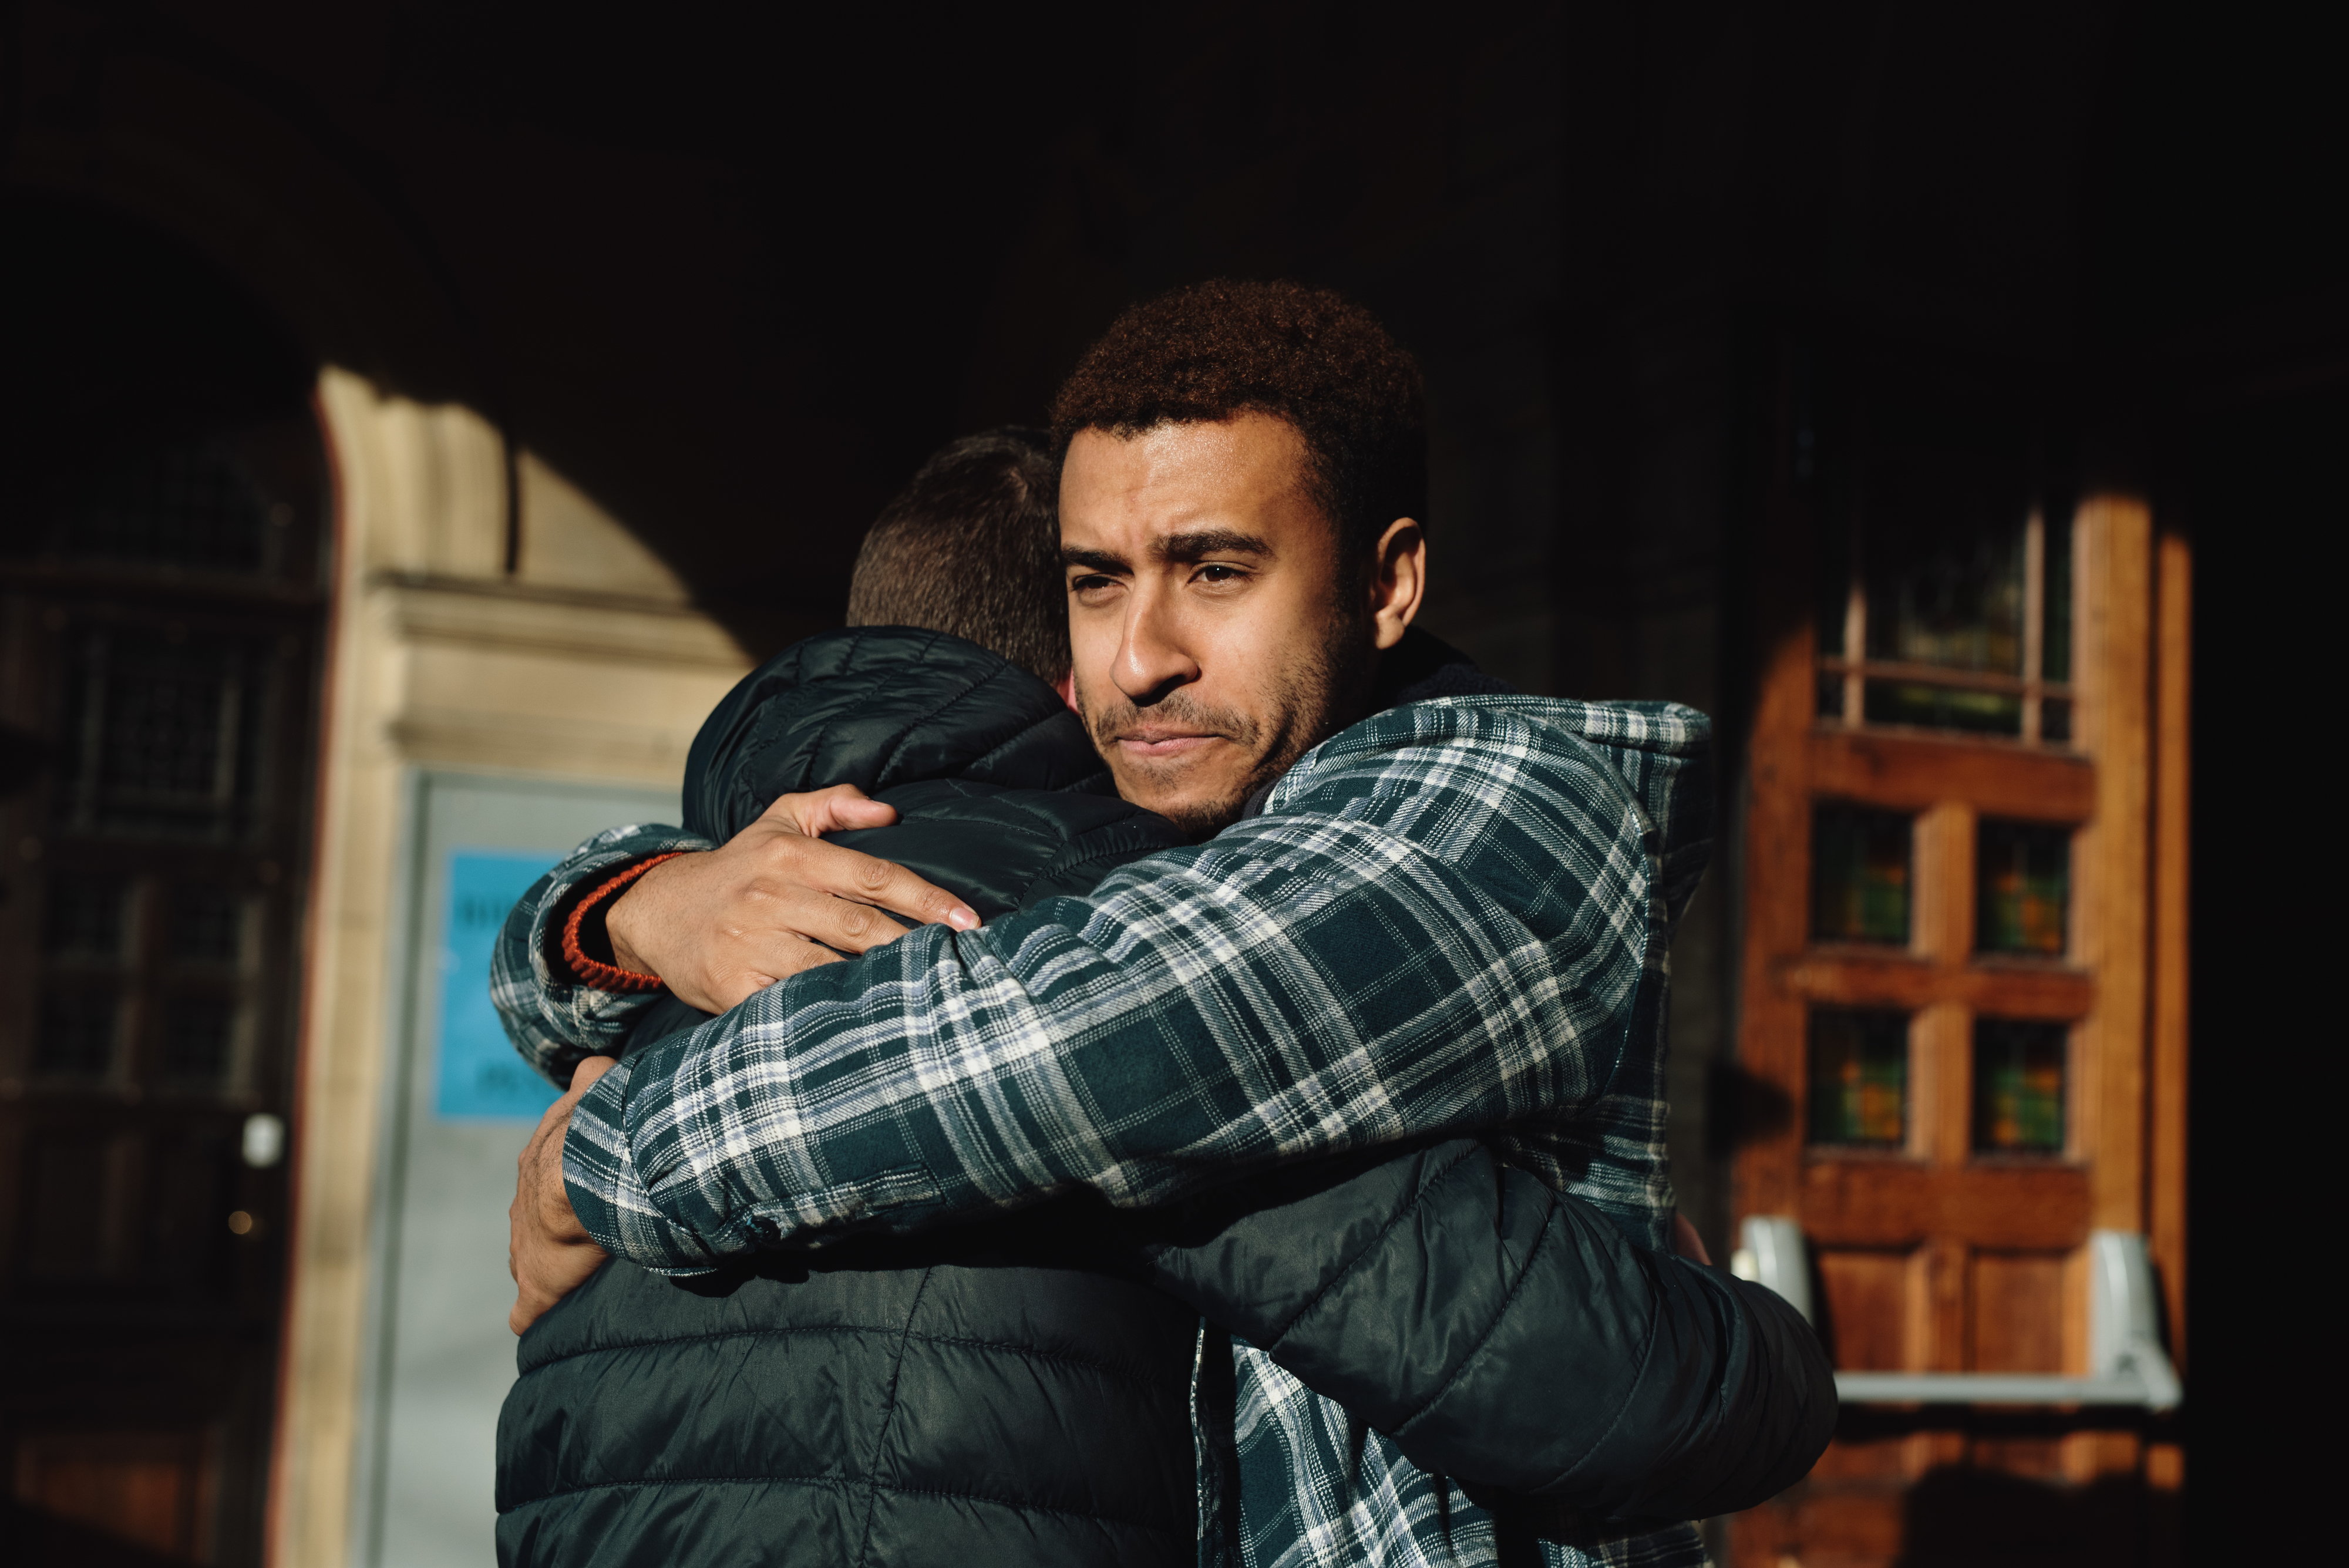 Two people are embracing in a warm hug outside a building, expressing affection and comfort. One person has curly hair and is wearing a plaid shirt